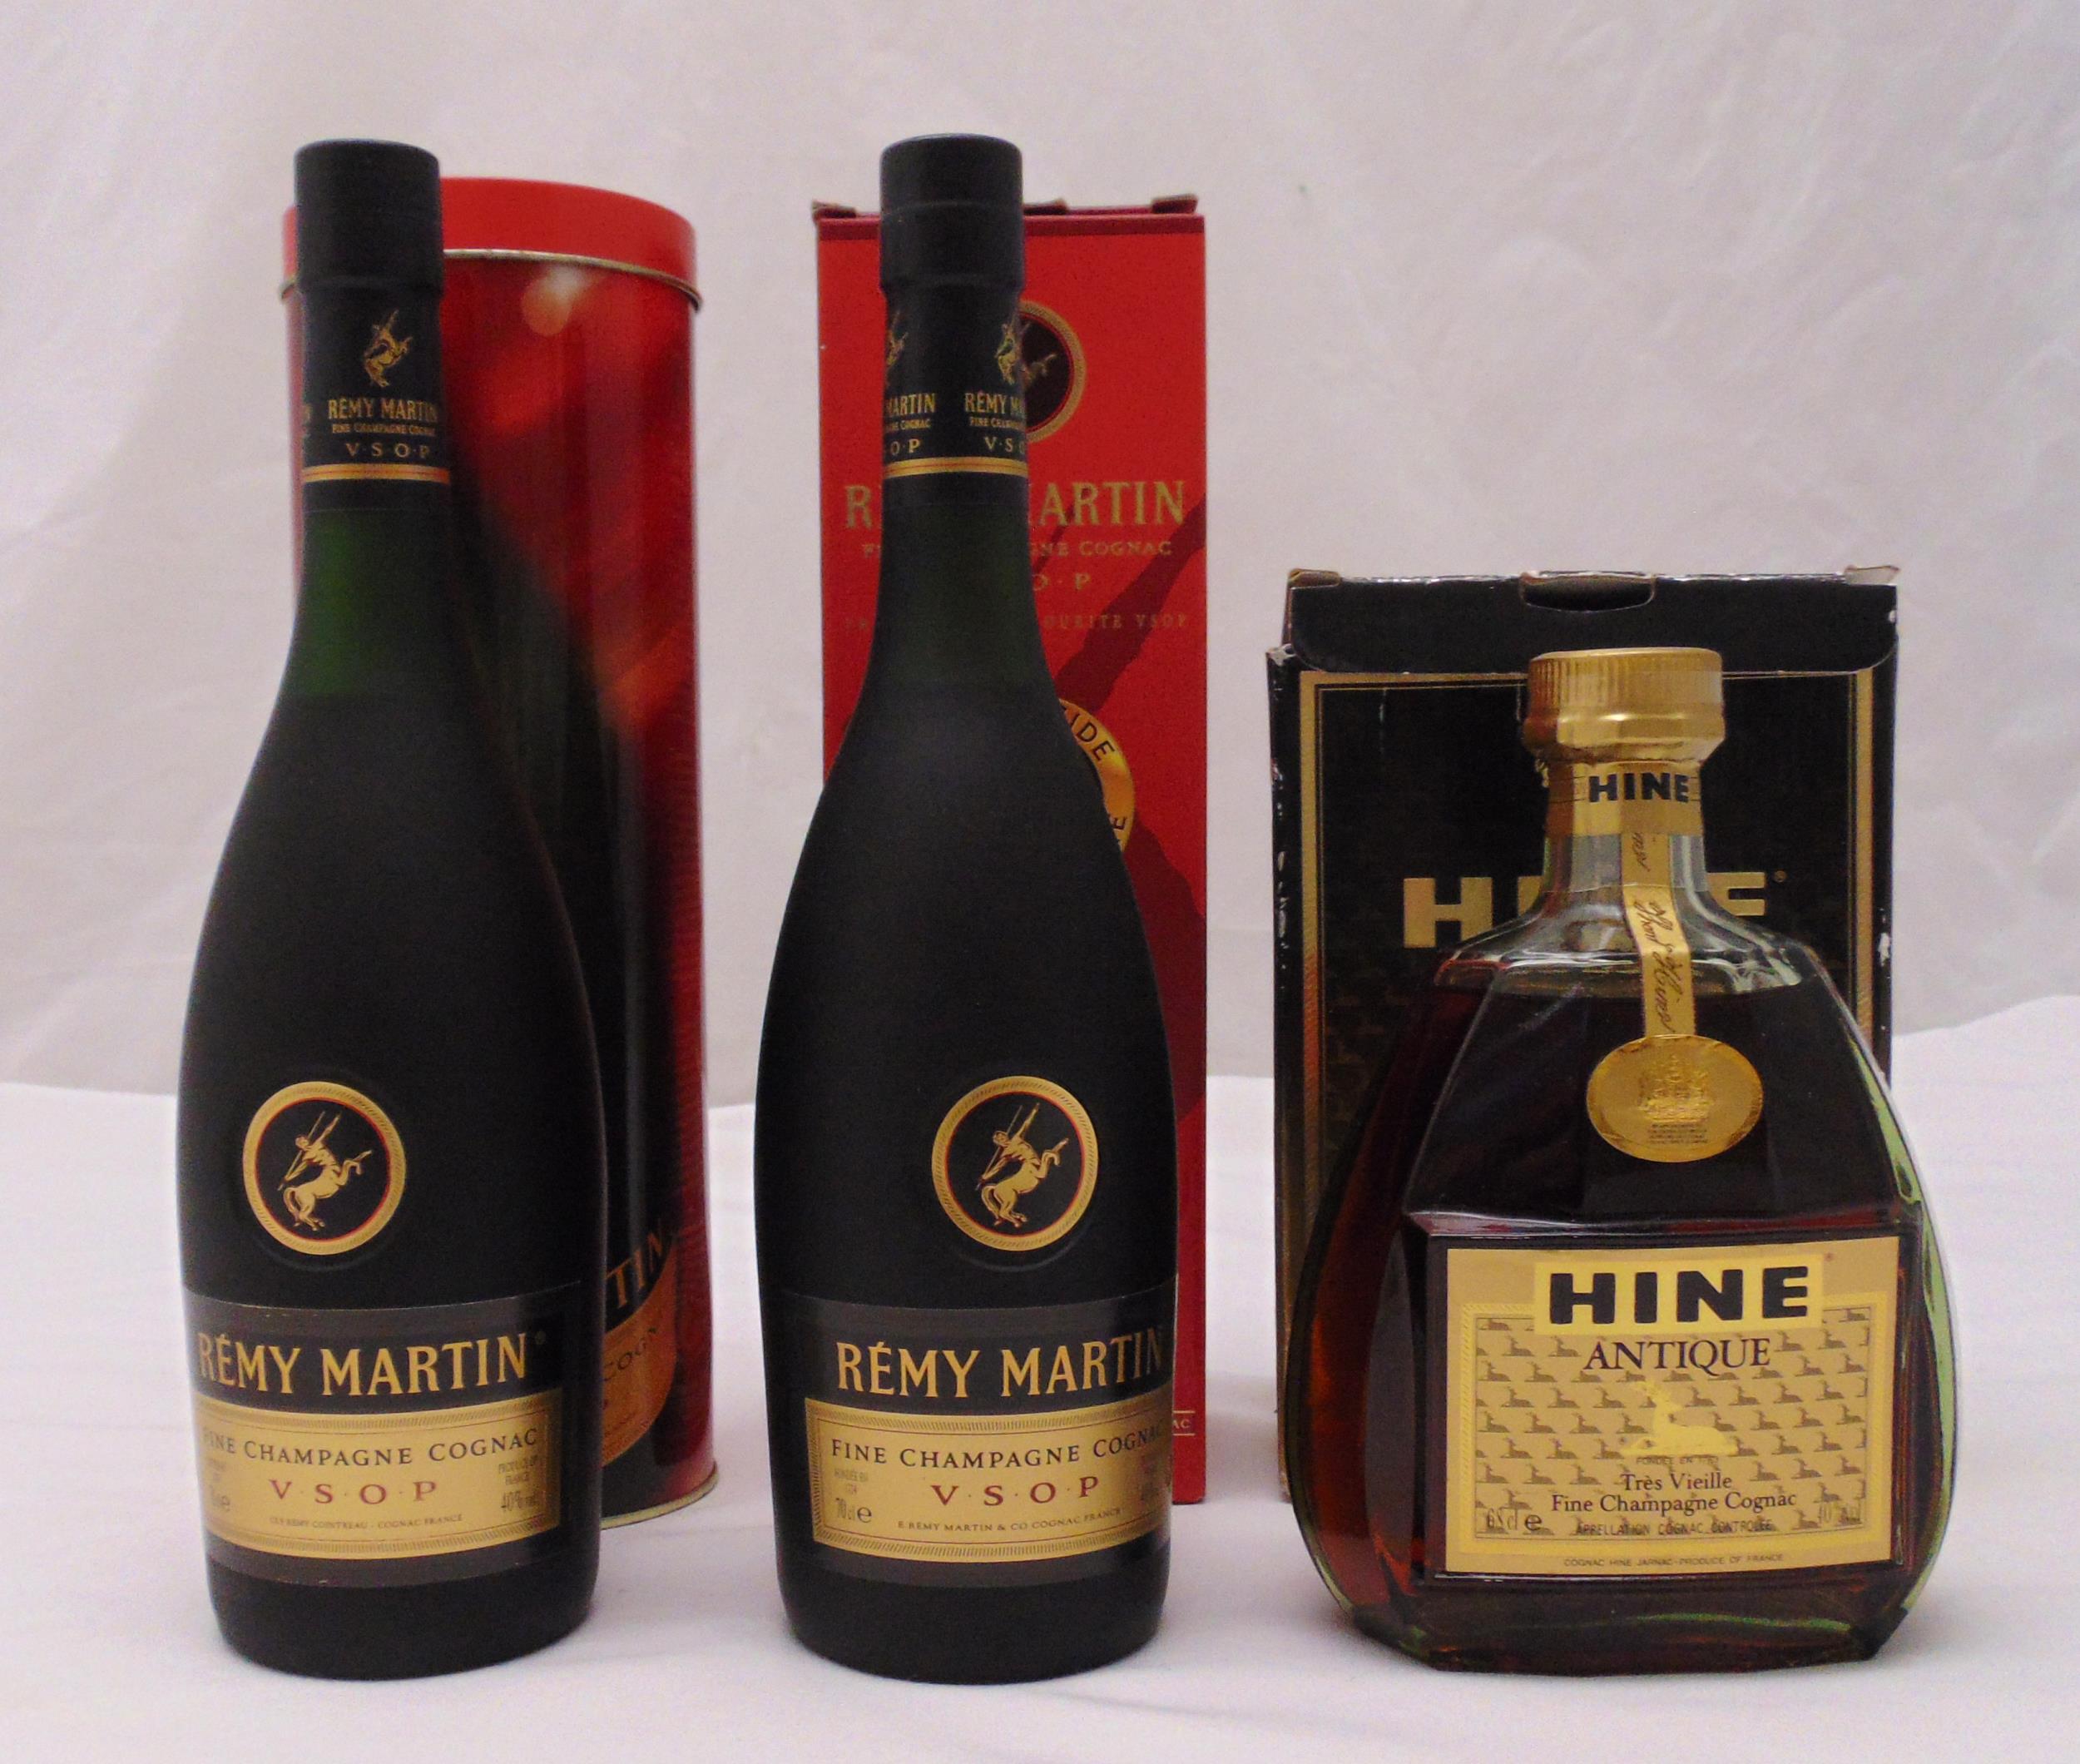 Three bottles of Cognac to include Hine Antique and two bottles of Remy Martin